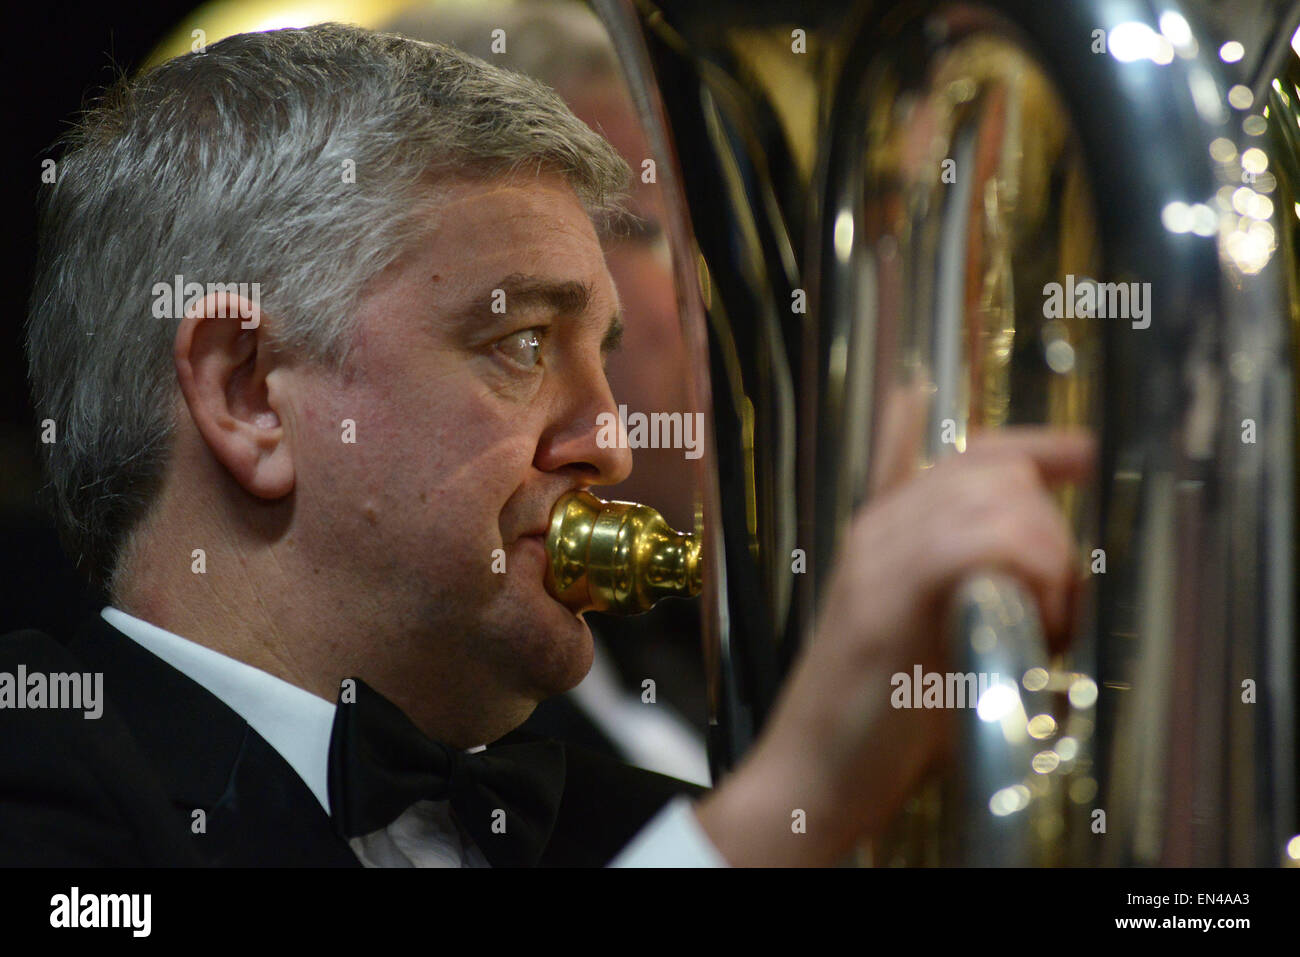 Grimethorpe Colliery Band in concert at Barnsley, South Yorkshire. 6th November 2014. Picture: Scott Bairstow/Alamy Stock Photo